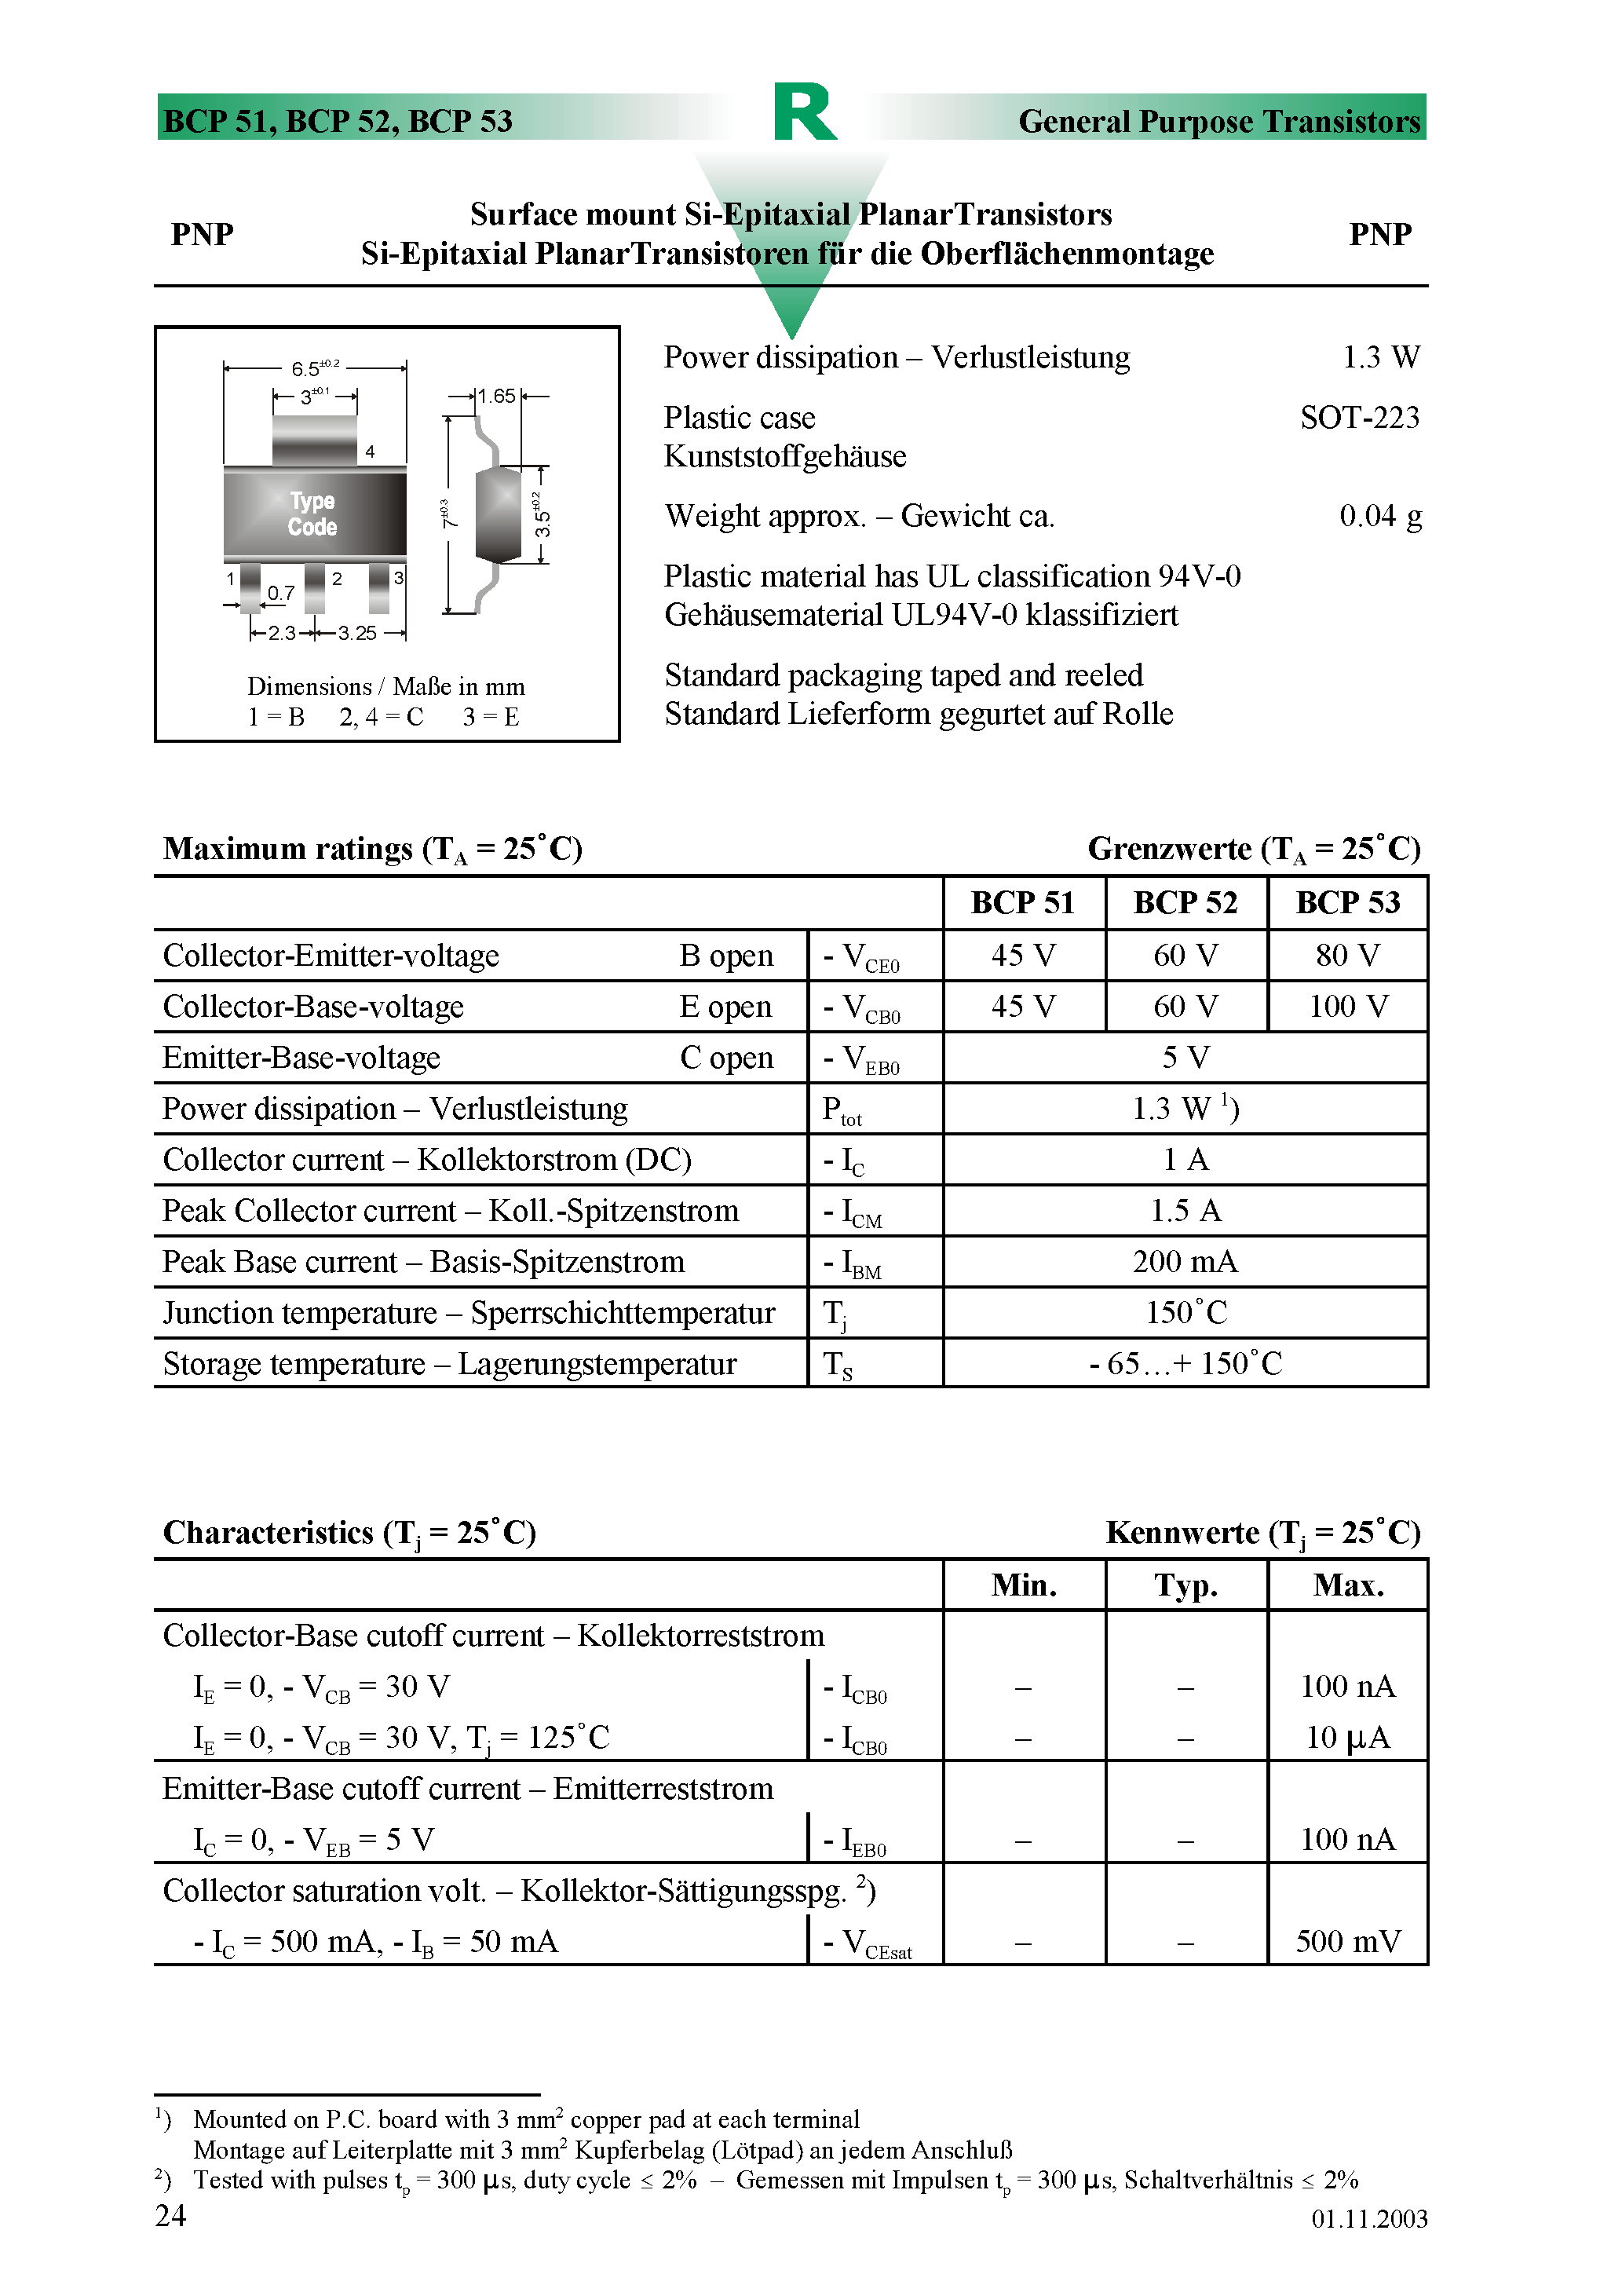 Datasheet BCP51 - Surface mount Si-Epitaxial PlanarTransistors page 1